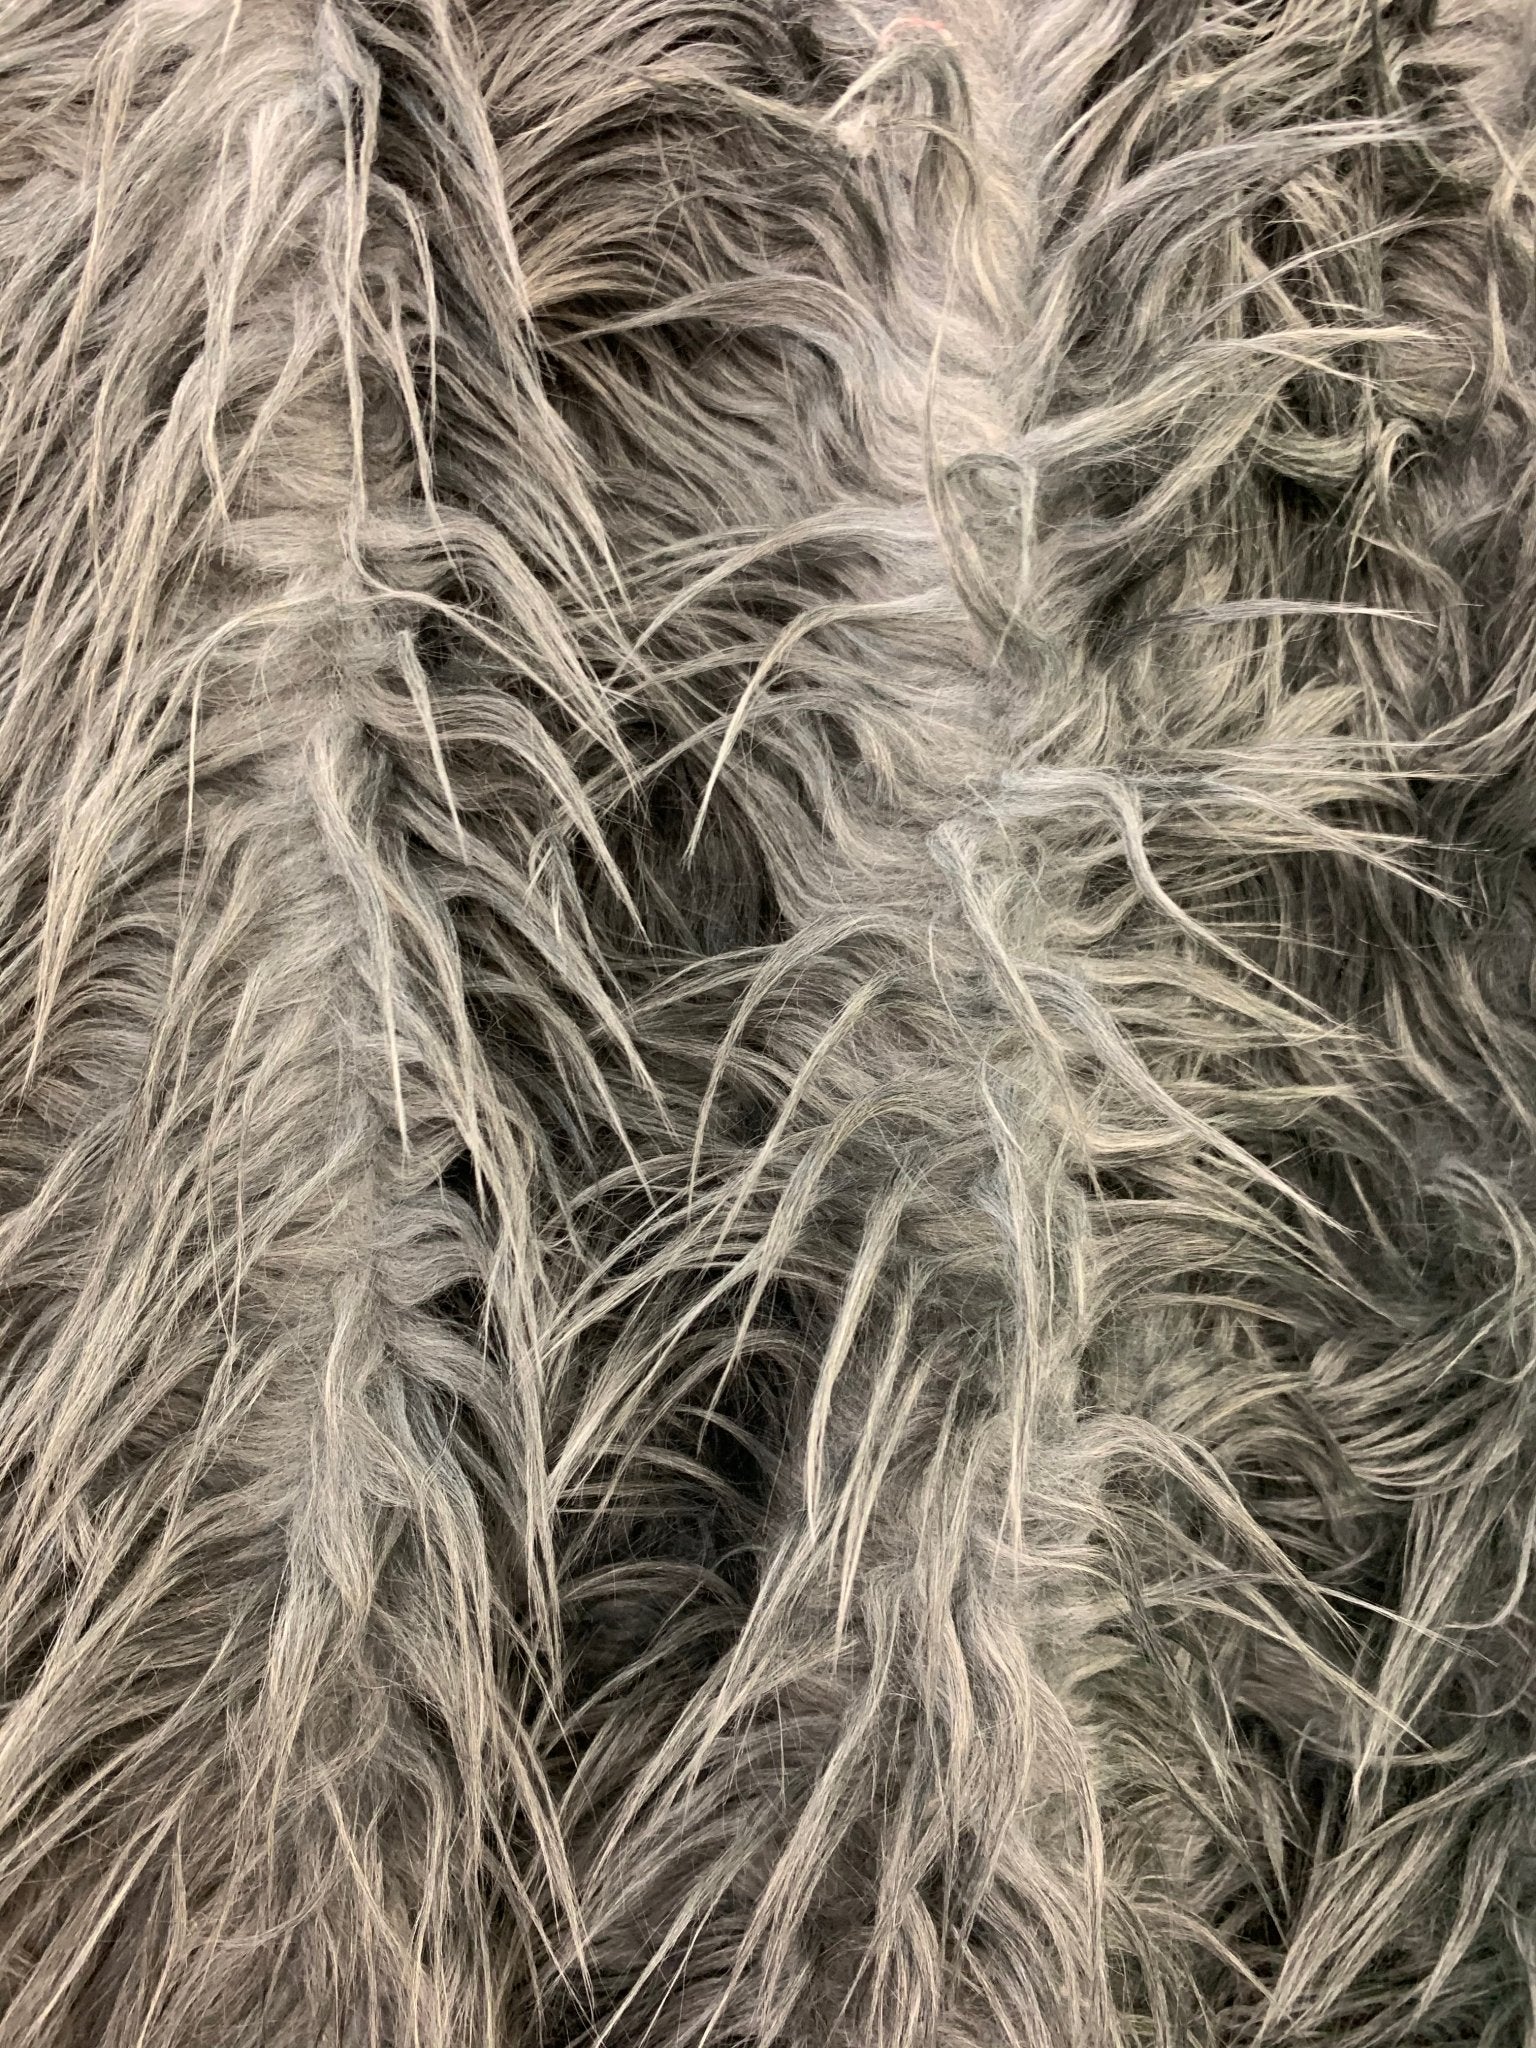 Mongolian Long Pile Fake Faux Fur Fabric Sold By The YardICEFABRICICE FABRICSGrayBy The Yard (60 inches Wide)Mongolian Long Pile Fake Faux Fur Fabric Sold By The Yard ICEFABRIC